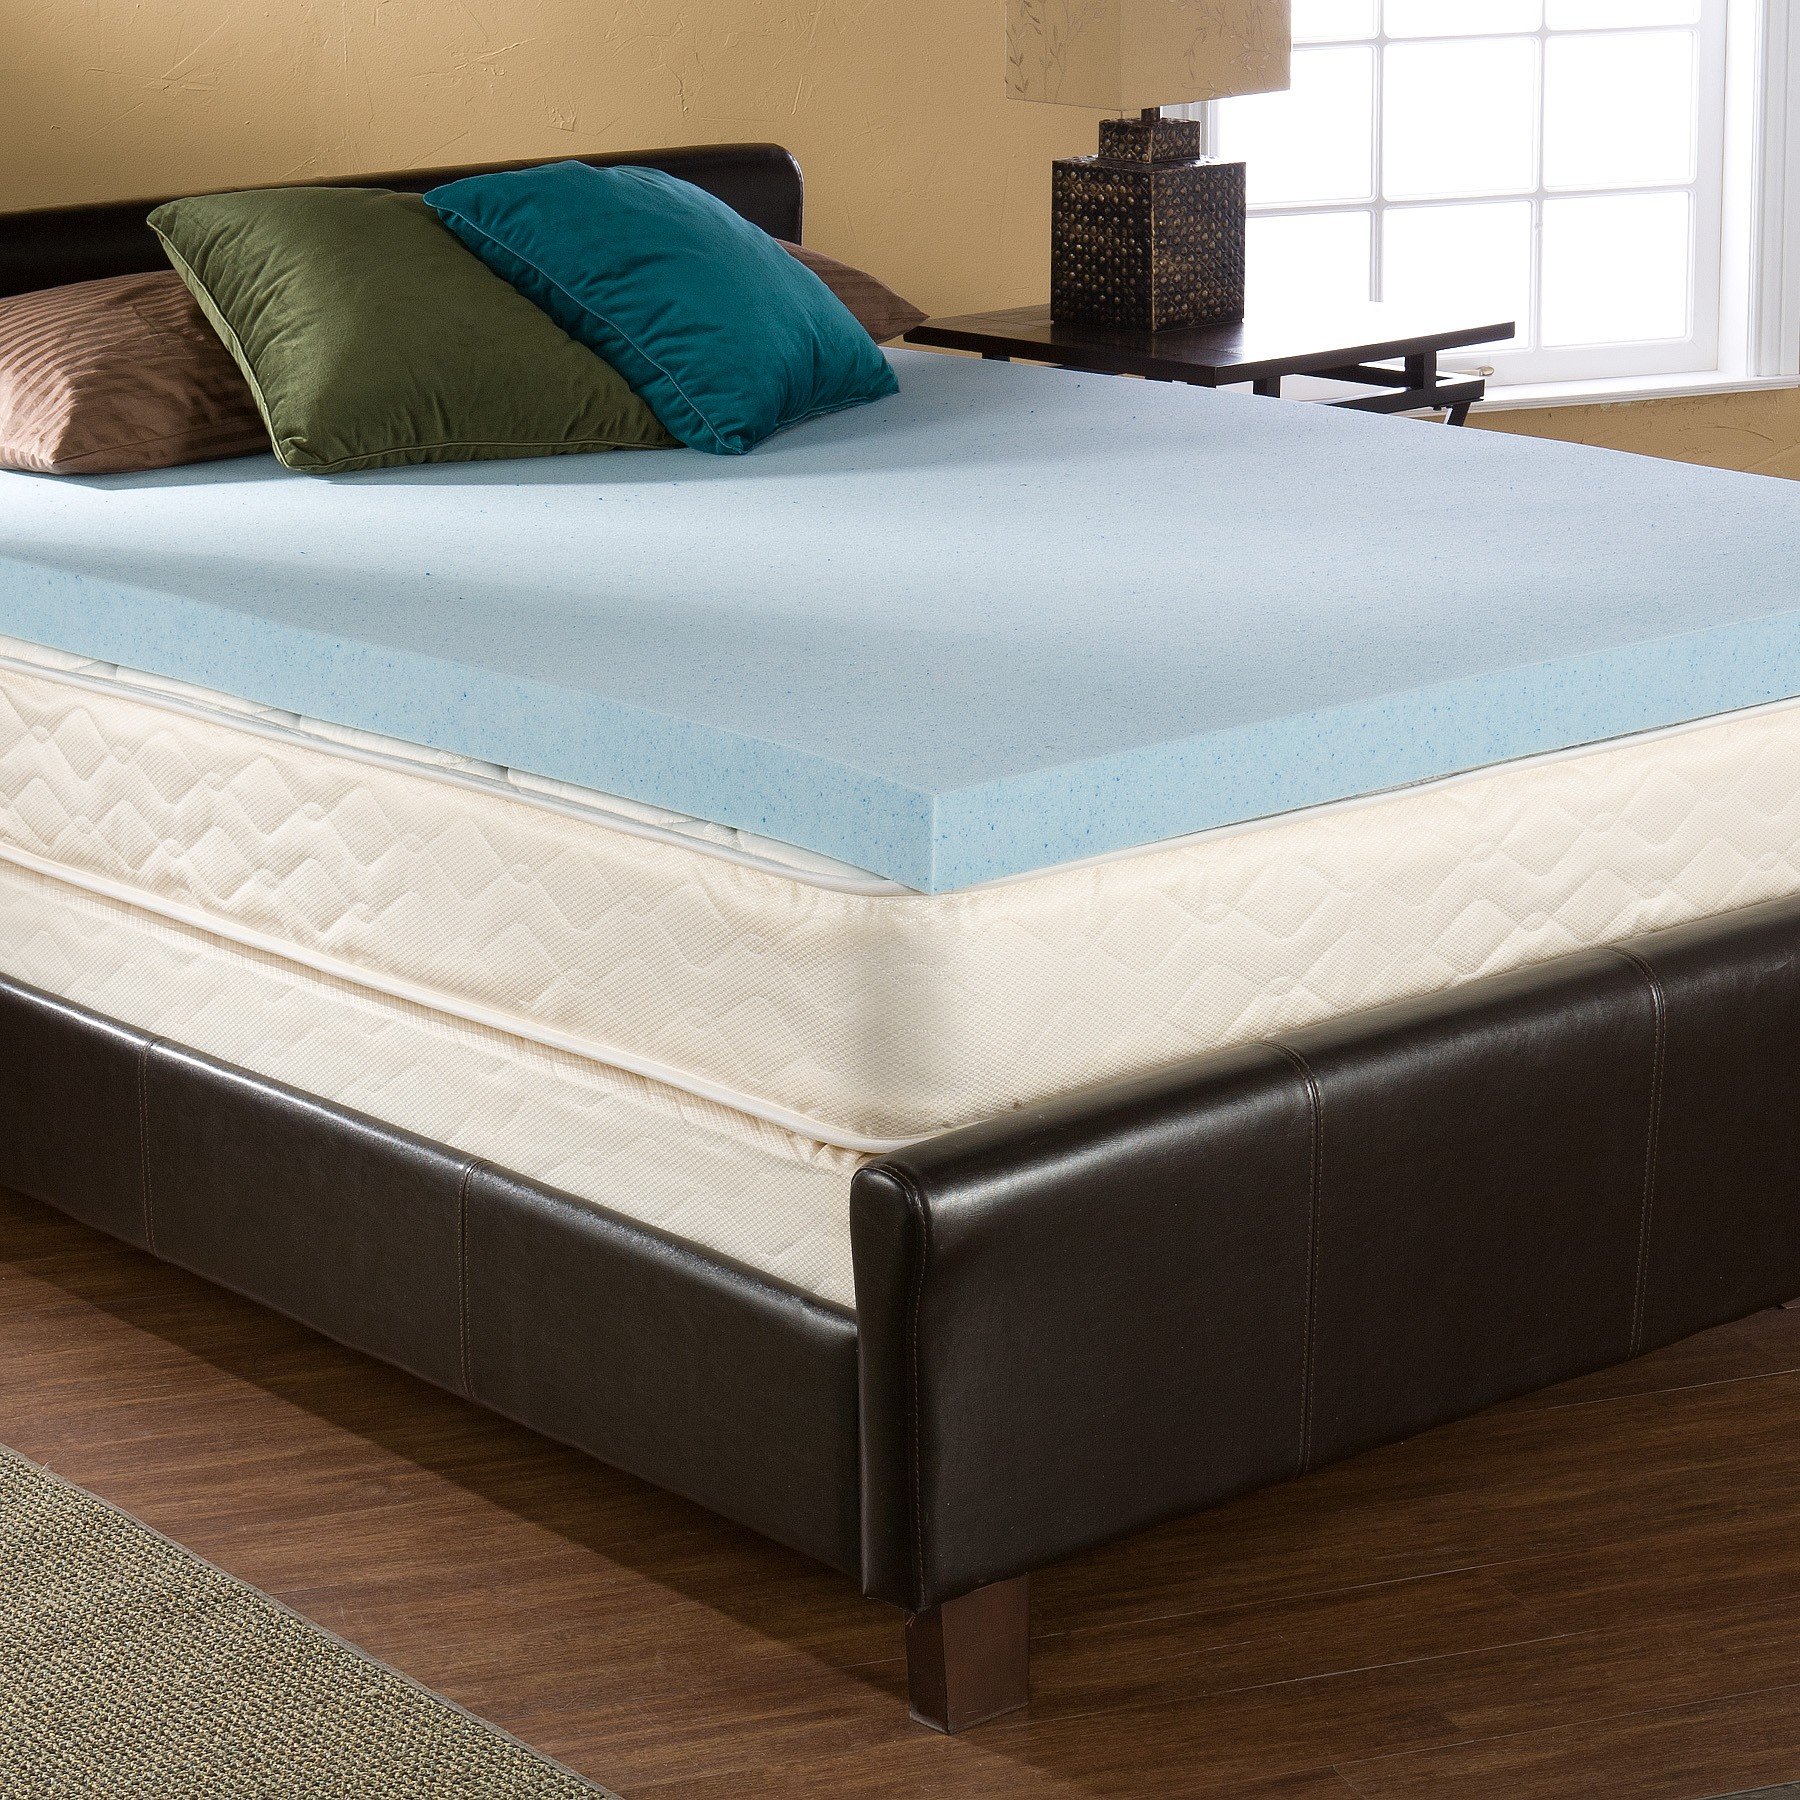 General Information About The Memory Foam Mattress